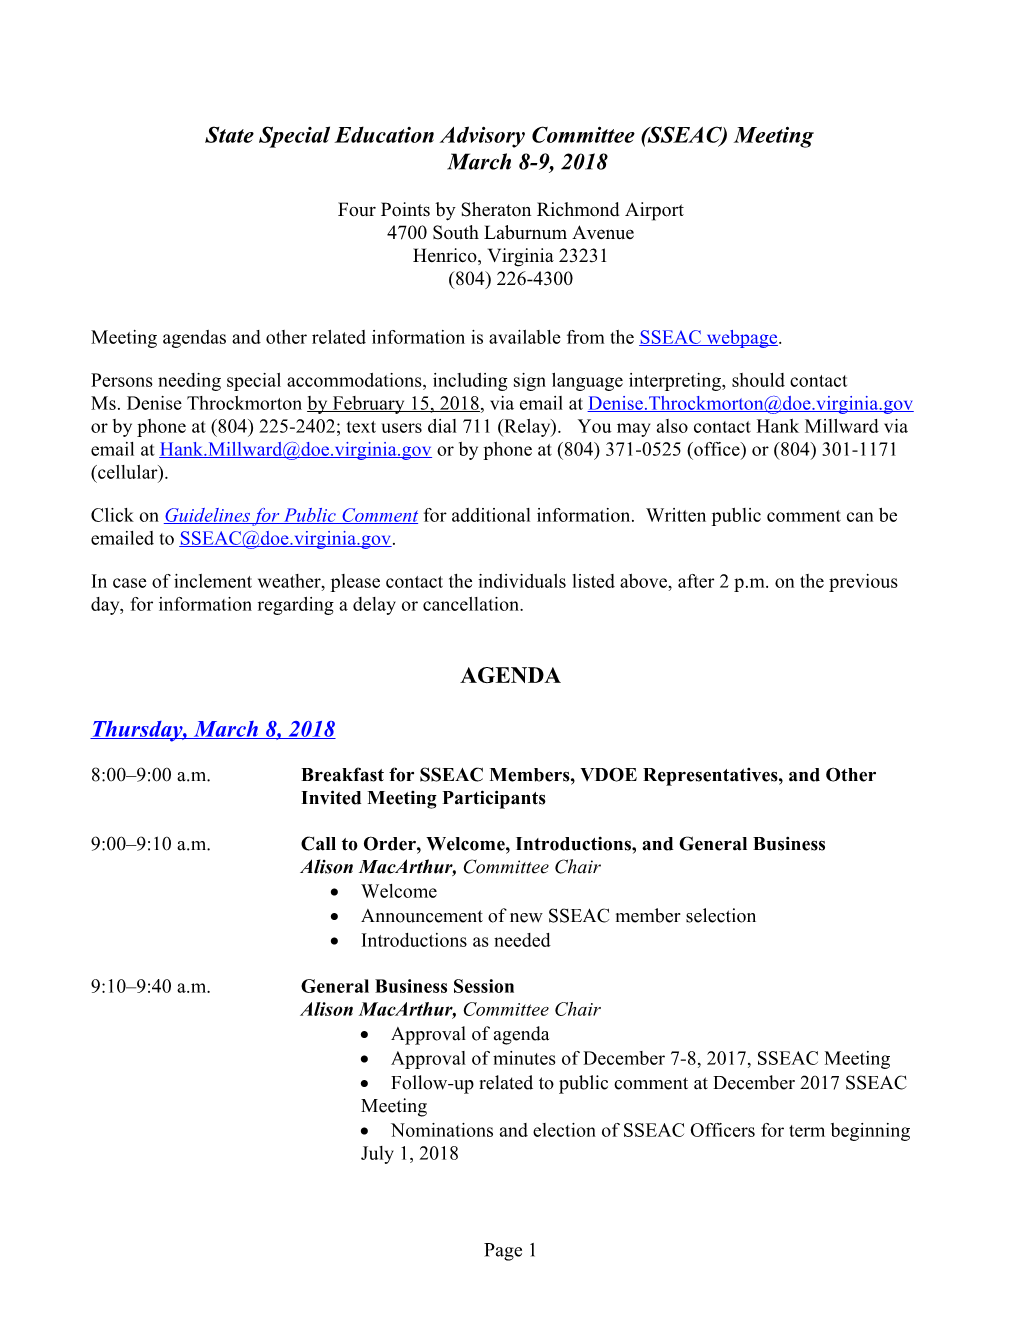 Virginia S State Special Education Advisory Committee (SSEAC)